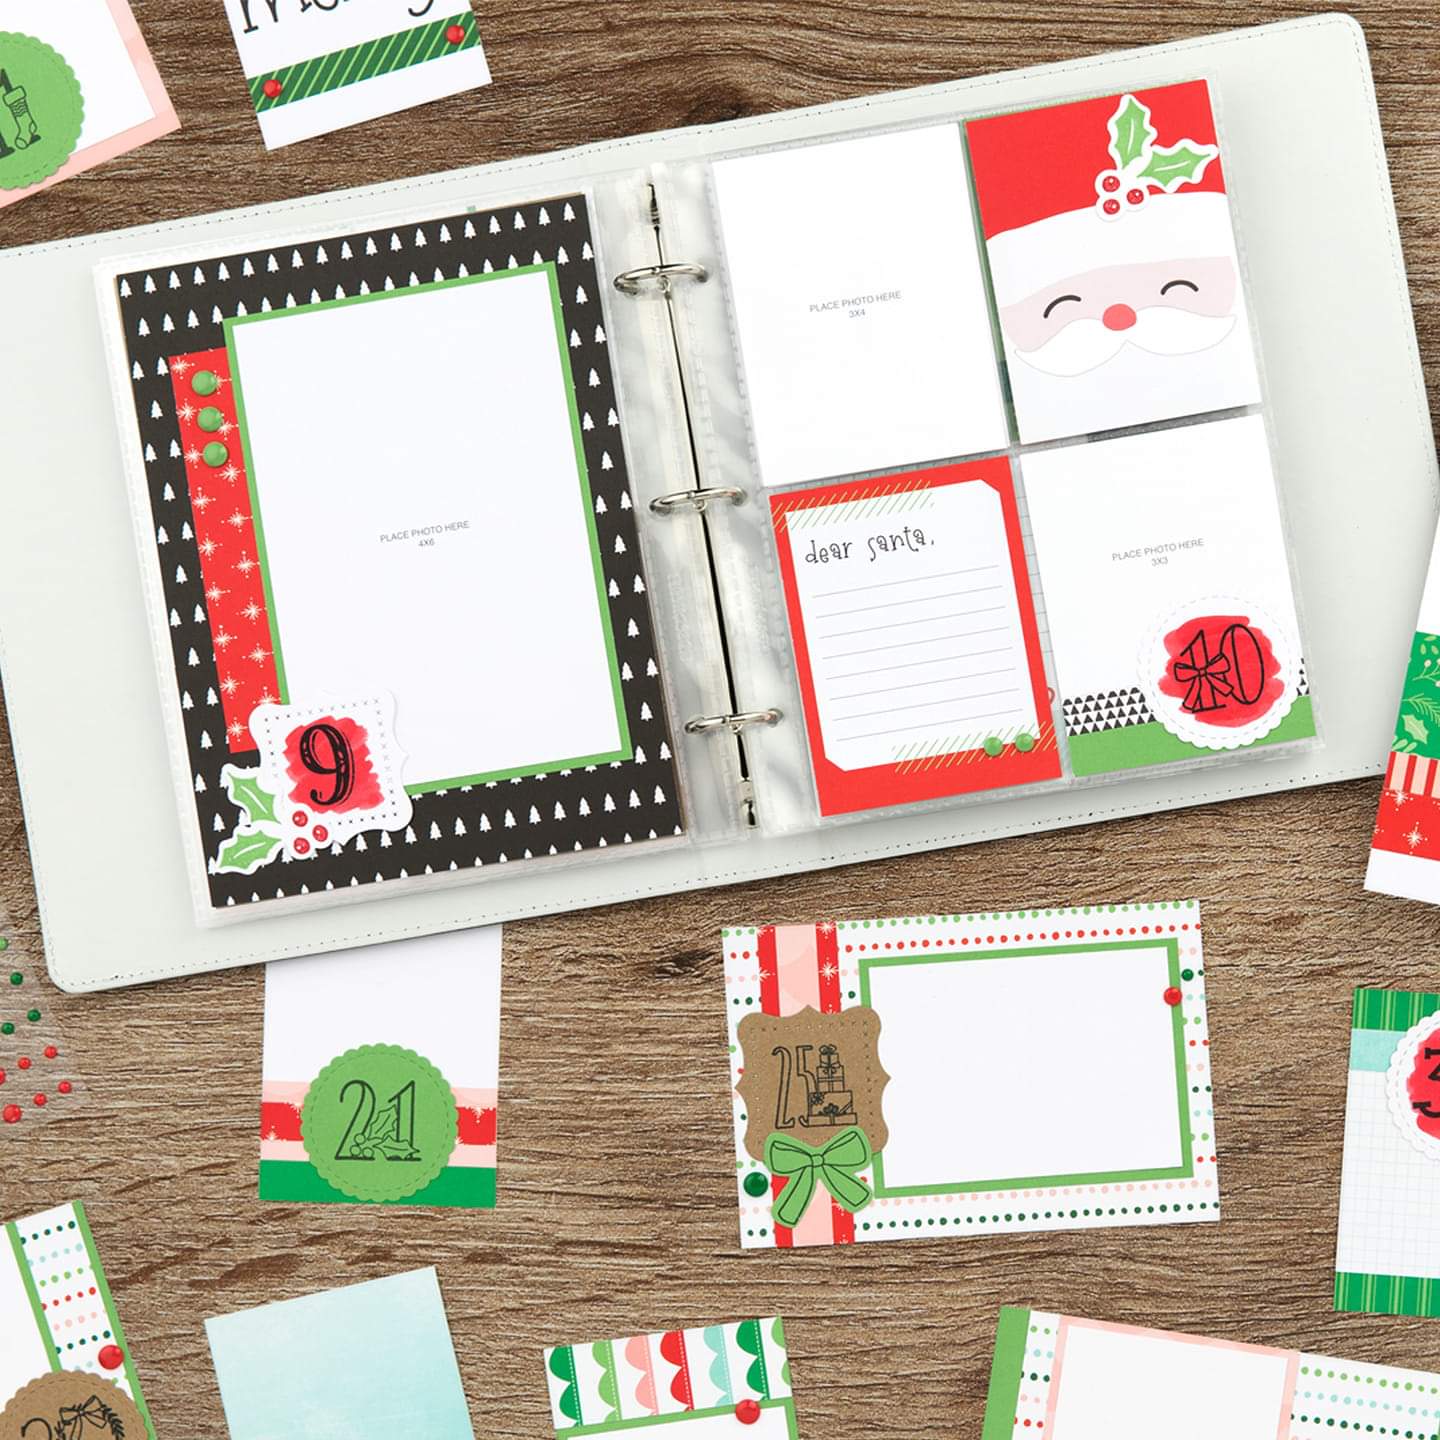 Make tags and cards for the holidays